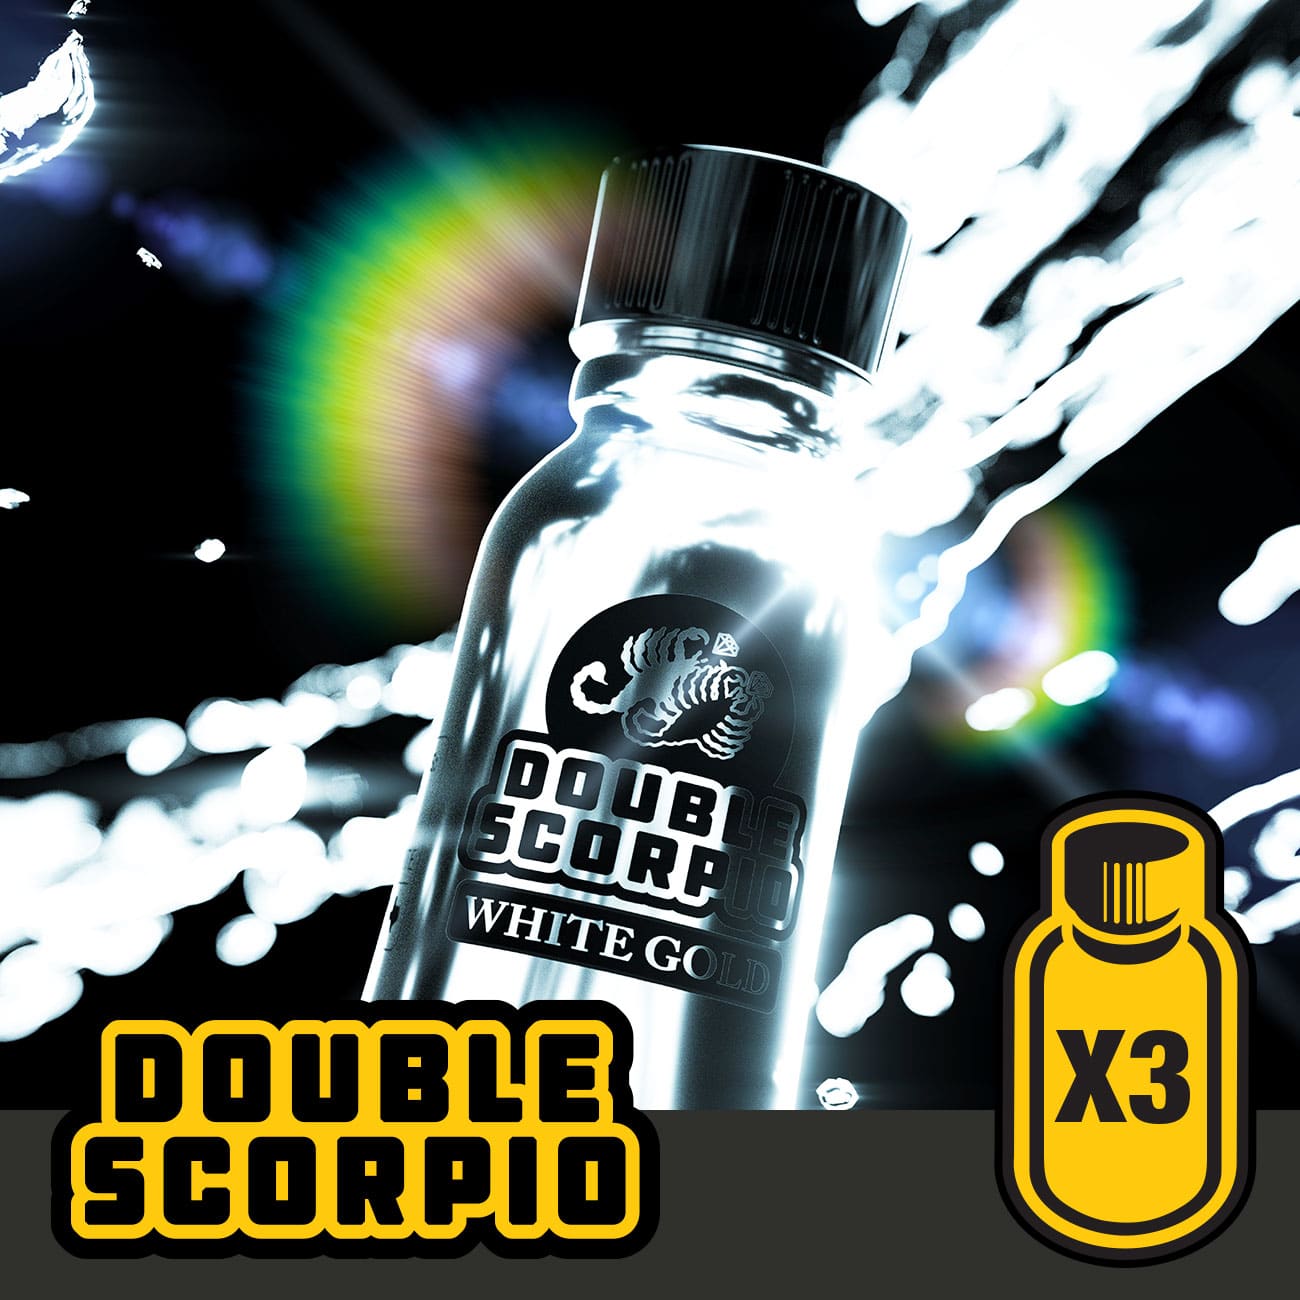 A luminous double scorpio white gold - triple pack (10ml x 3) with vibrant light effects in the background, emphasizing the intensity of the product, tripled by the 'x3' icon.